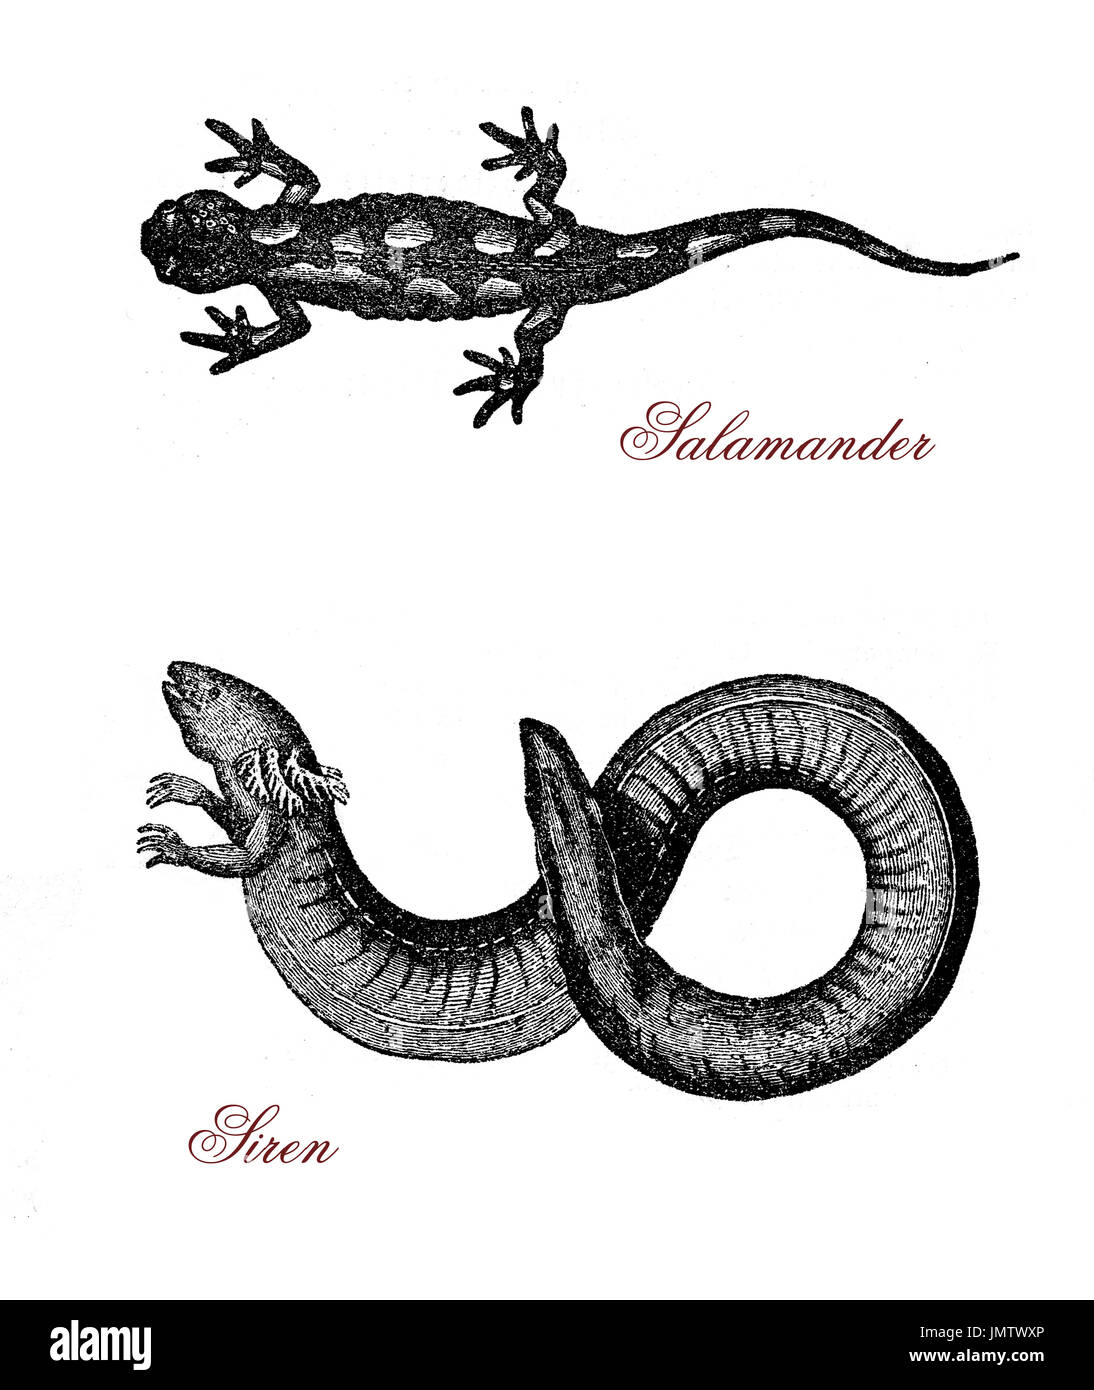 Vintage engraving of siren, aquatic salamander similar to eel and partially herbivorous, and spotted salamander, amphibian lizard-like normally black with yellow-orange spots. Stock Photo